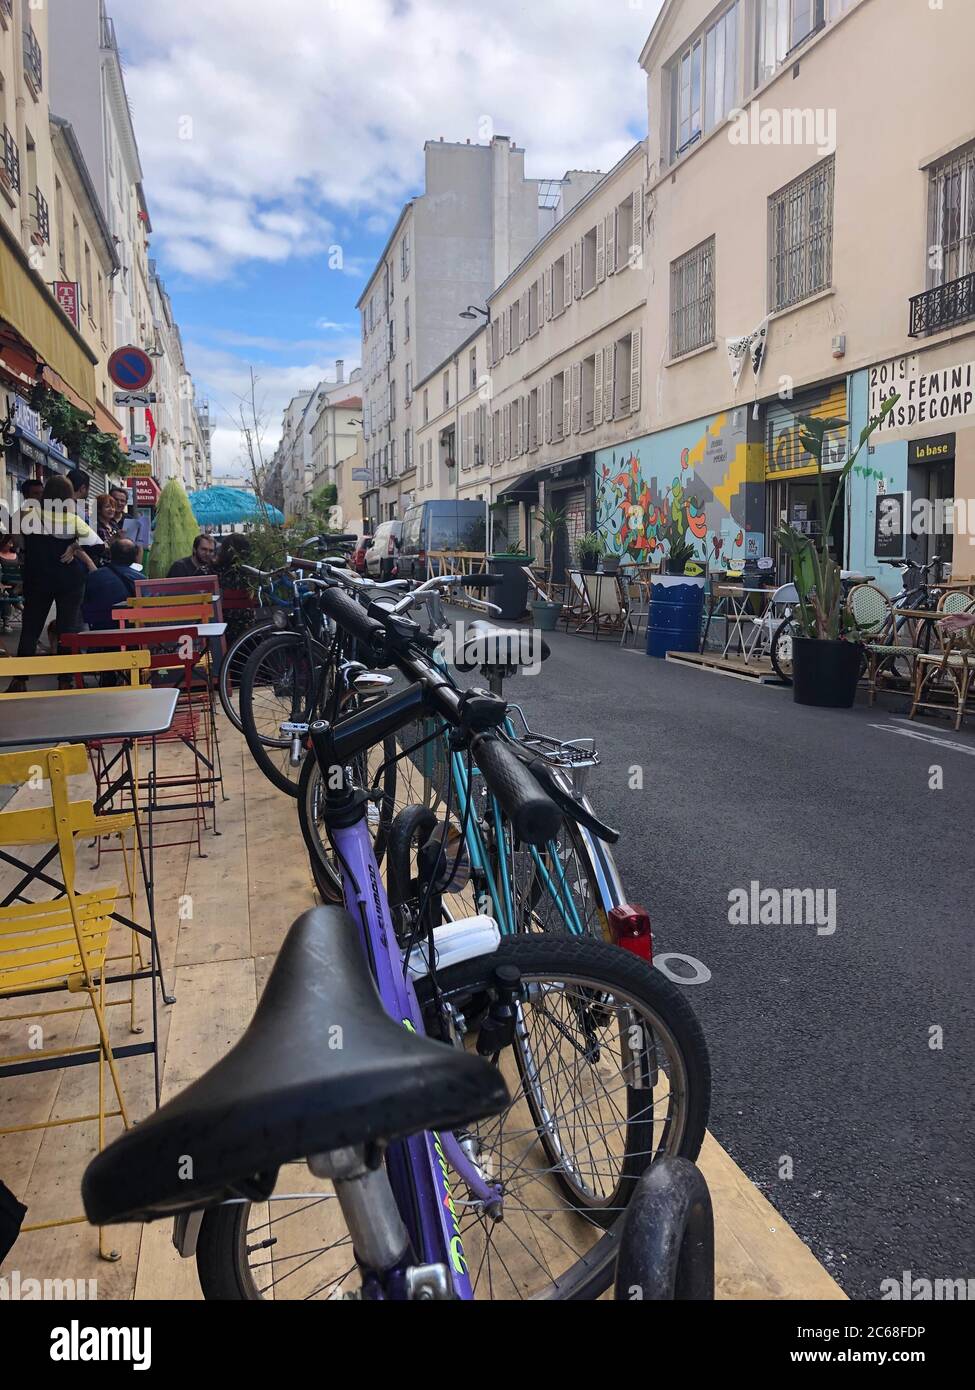 Paris, France. 05th July, 2020. View from the terrace of the restaurant 'Le petit Cambodge' on bicycles and the street Rue Bichat in the 10th arrondissement. Since the Corona pandemic, the whole of Paris is like one open-air café - with XXL terraces. (to dpa going out in Corona times: All of Paris is one terrace) Credit: Julia Naue/dpa/Alamy Live News Stock Photo